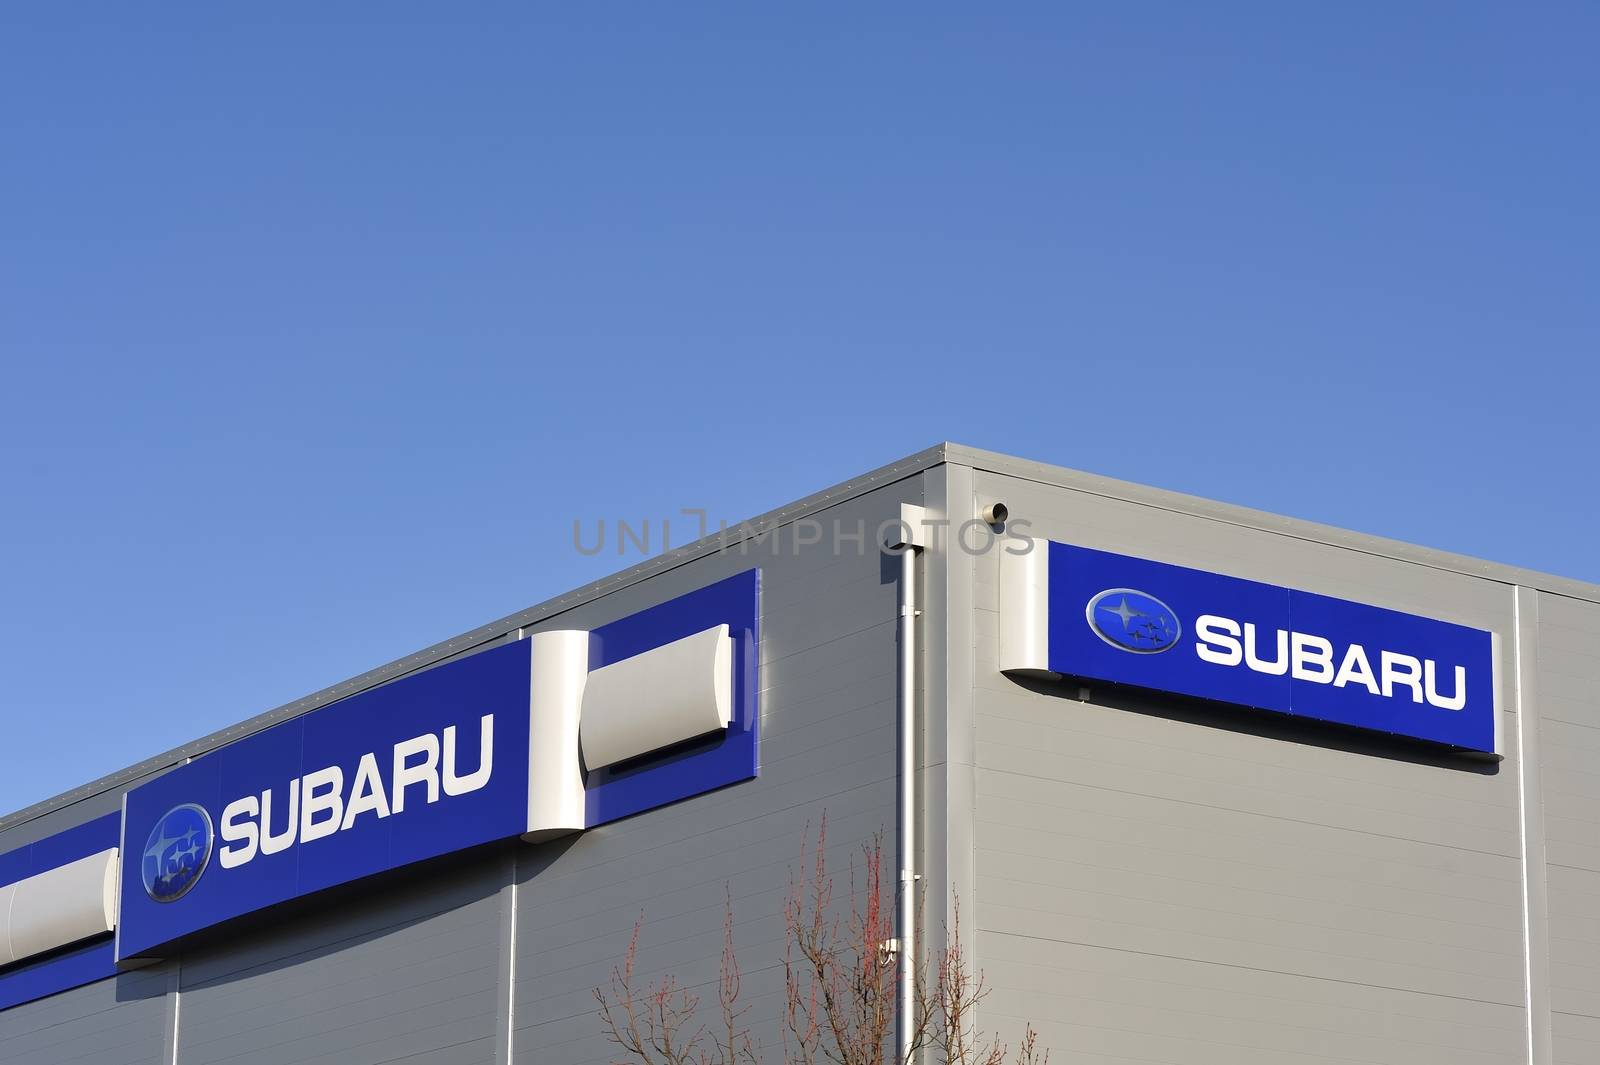 STOCKHOLM - MAY 1 2013: Subaru logo sign on showroom premises photographed on may 1th 2013 in Stockholm, Sweden.